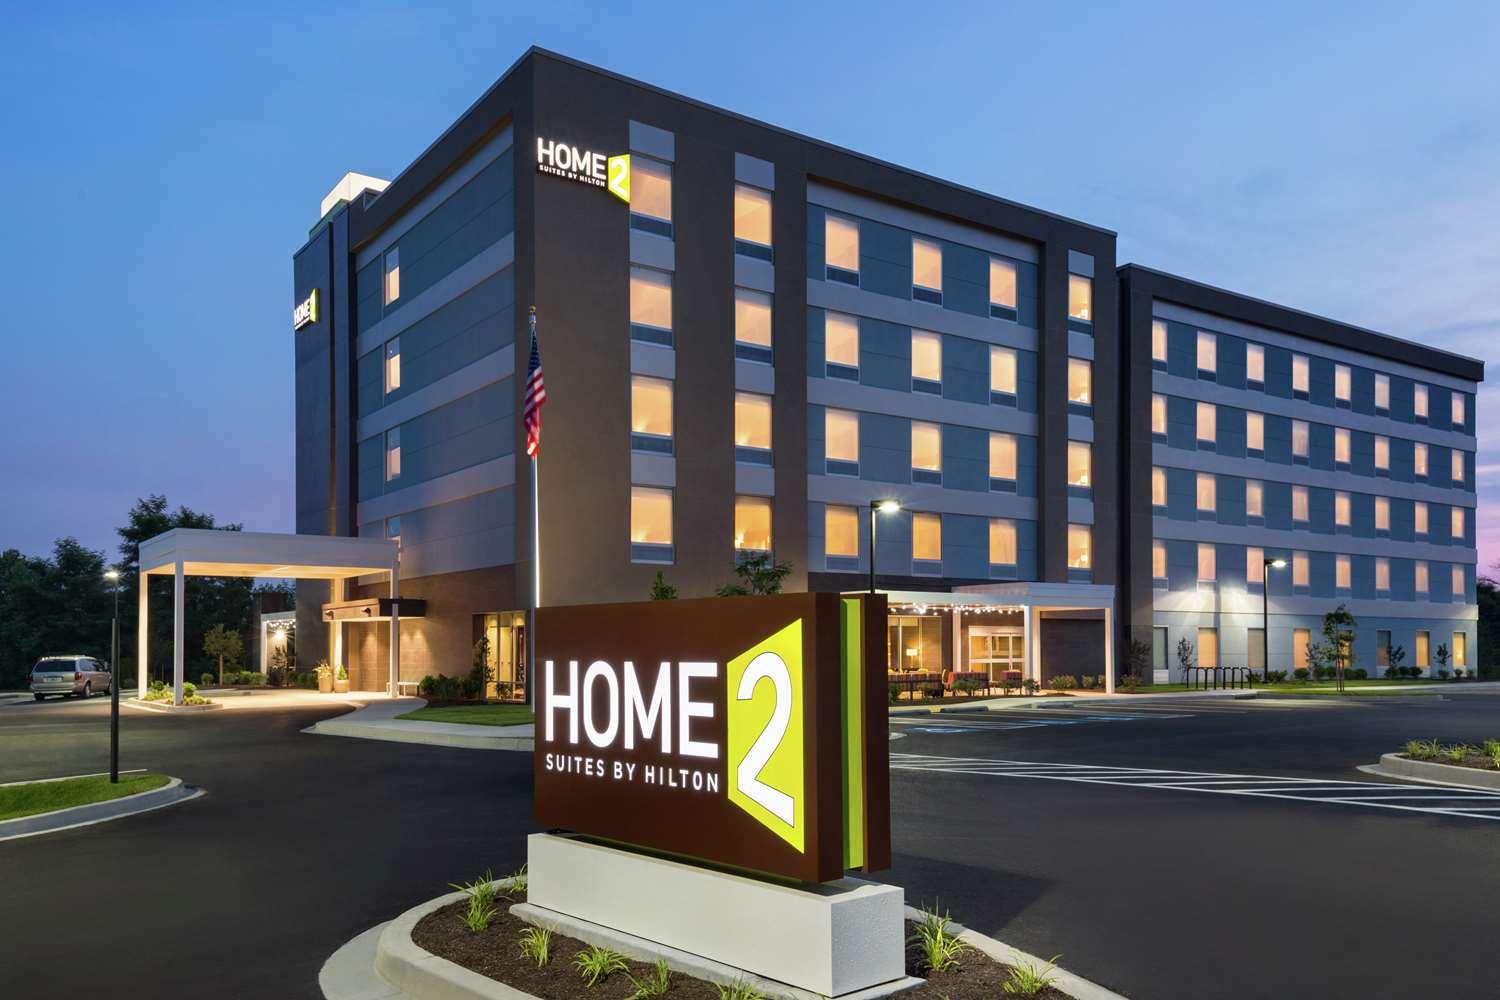 Home2 Suites by Hilton Frederick in Frederick, MD